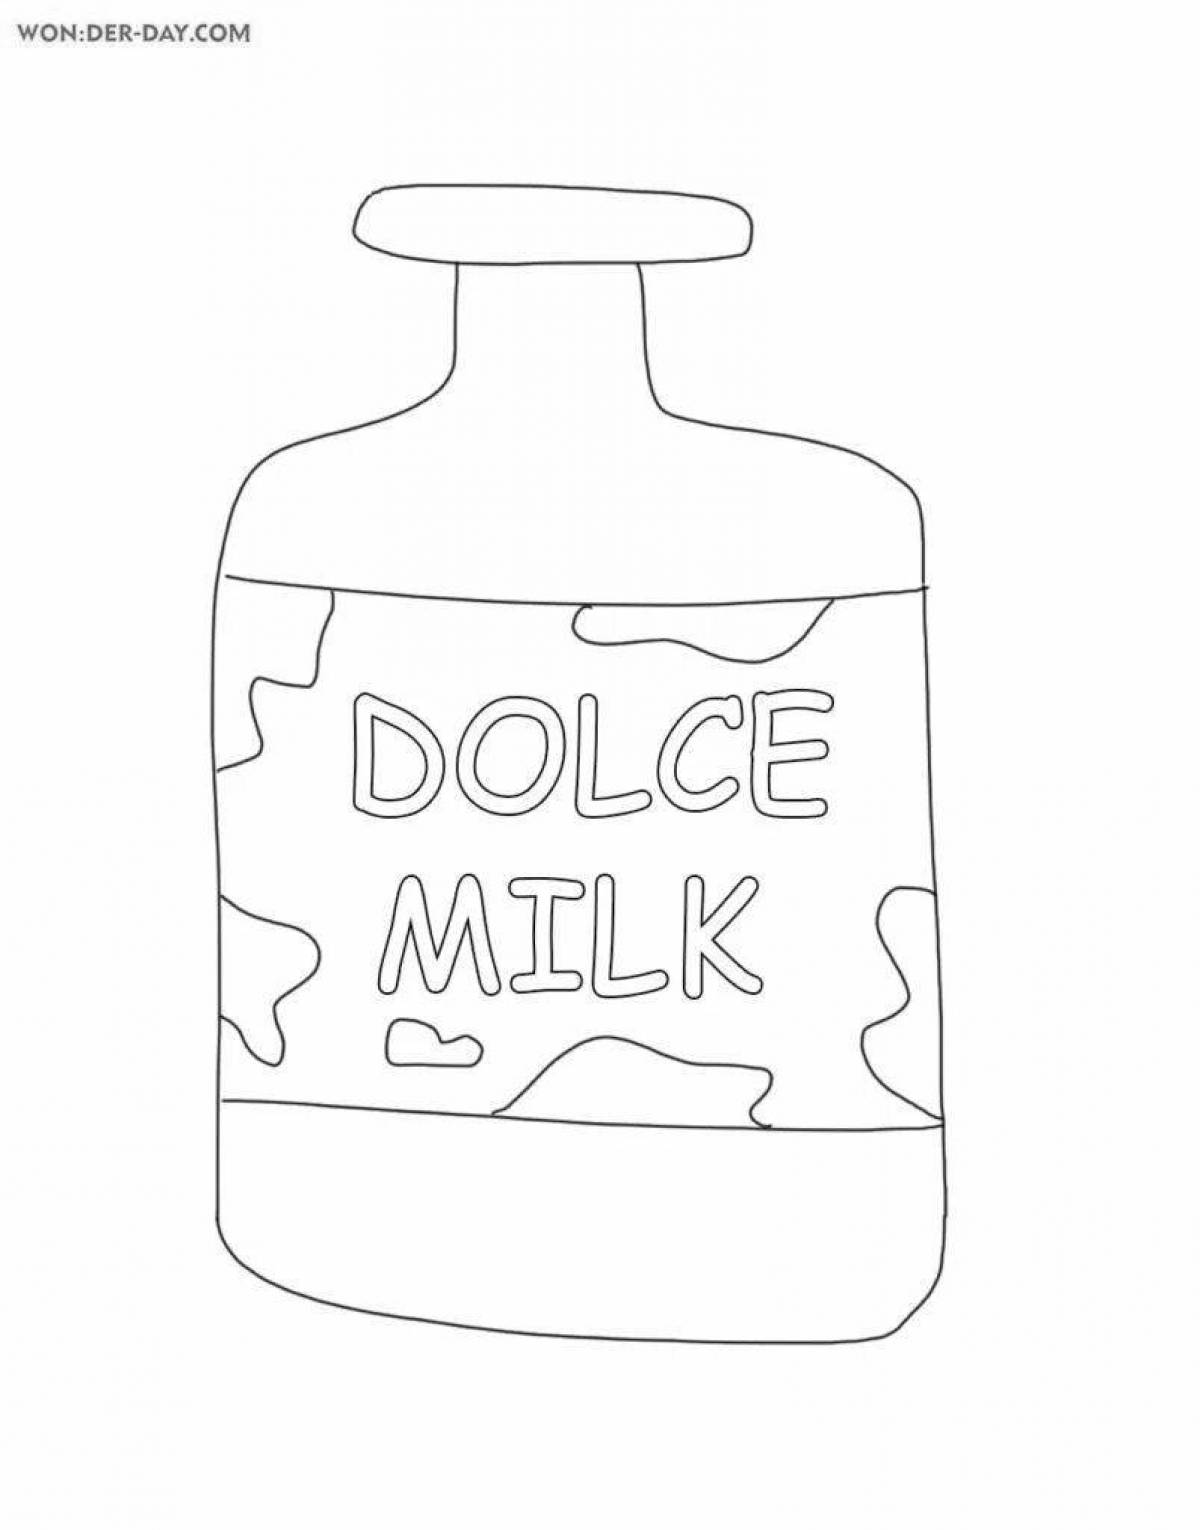 Dolce milk cosmetics for girls #18